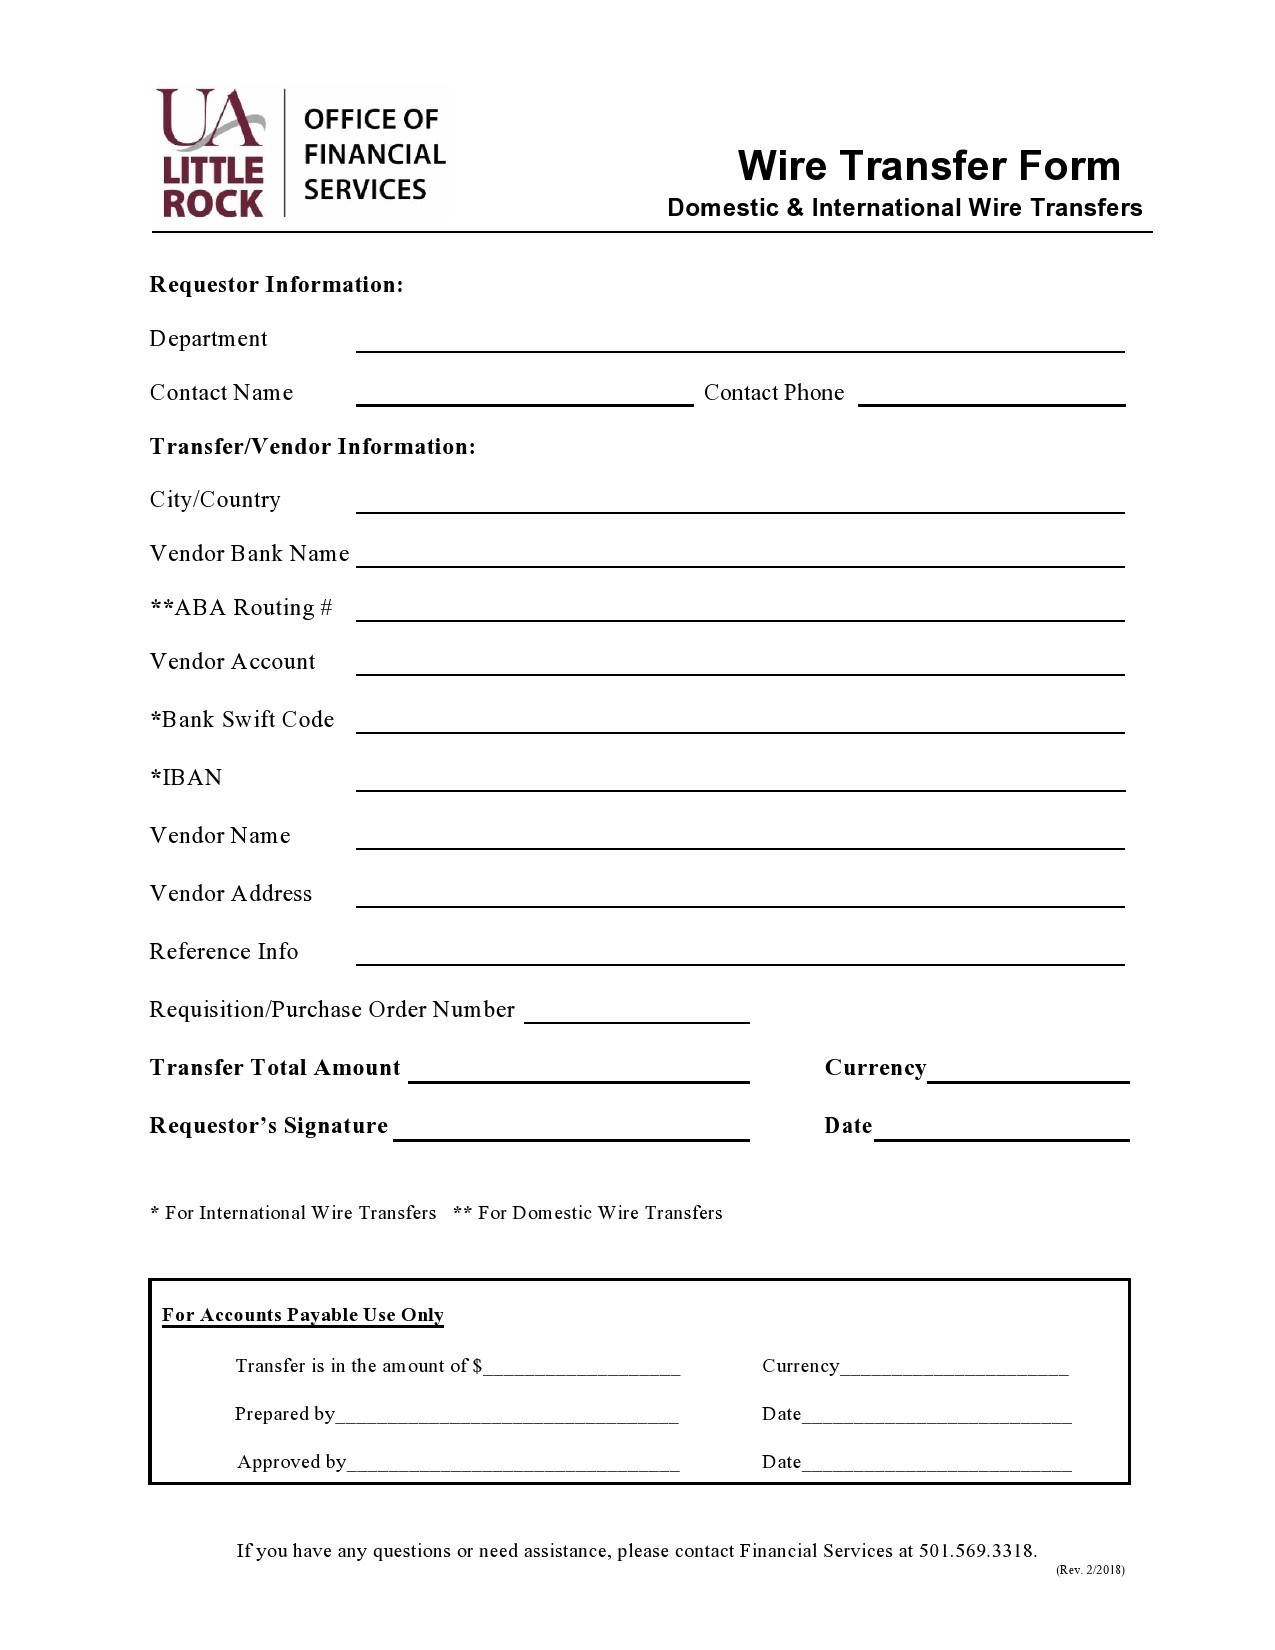 Free wire transfer form 39